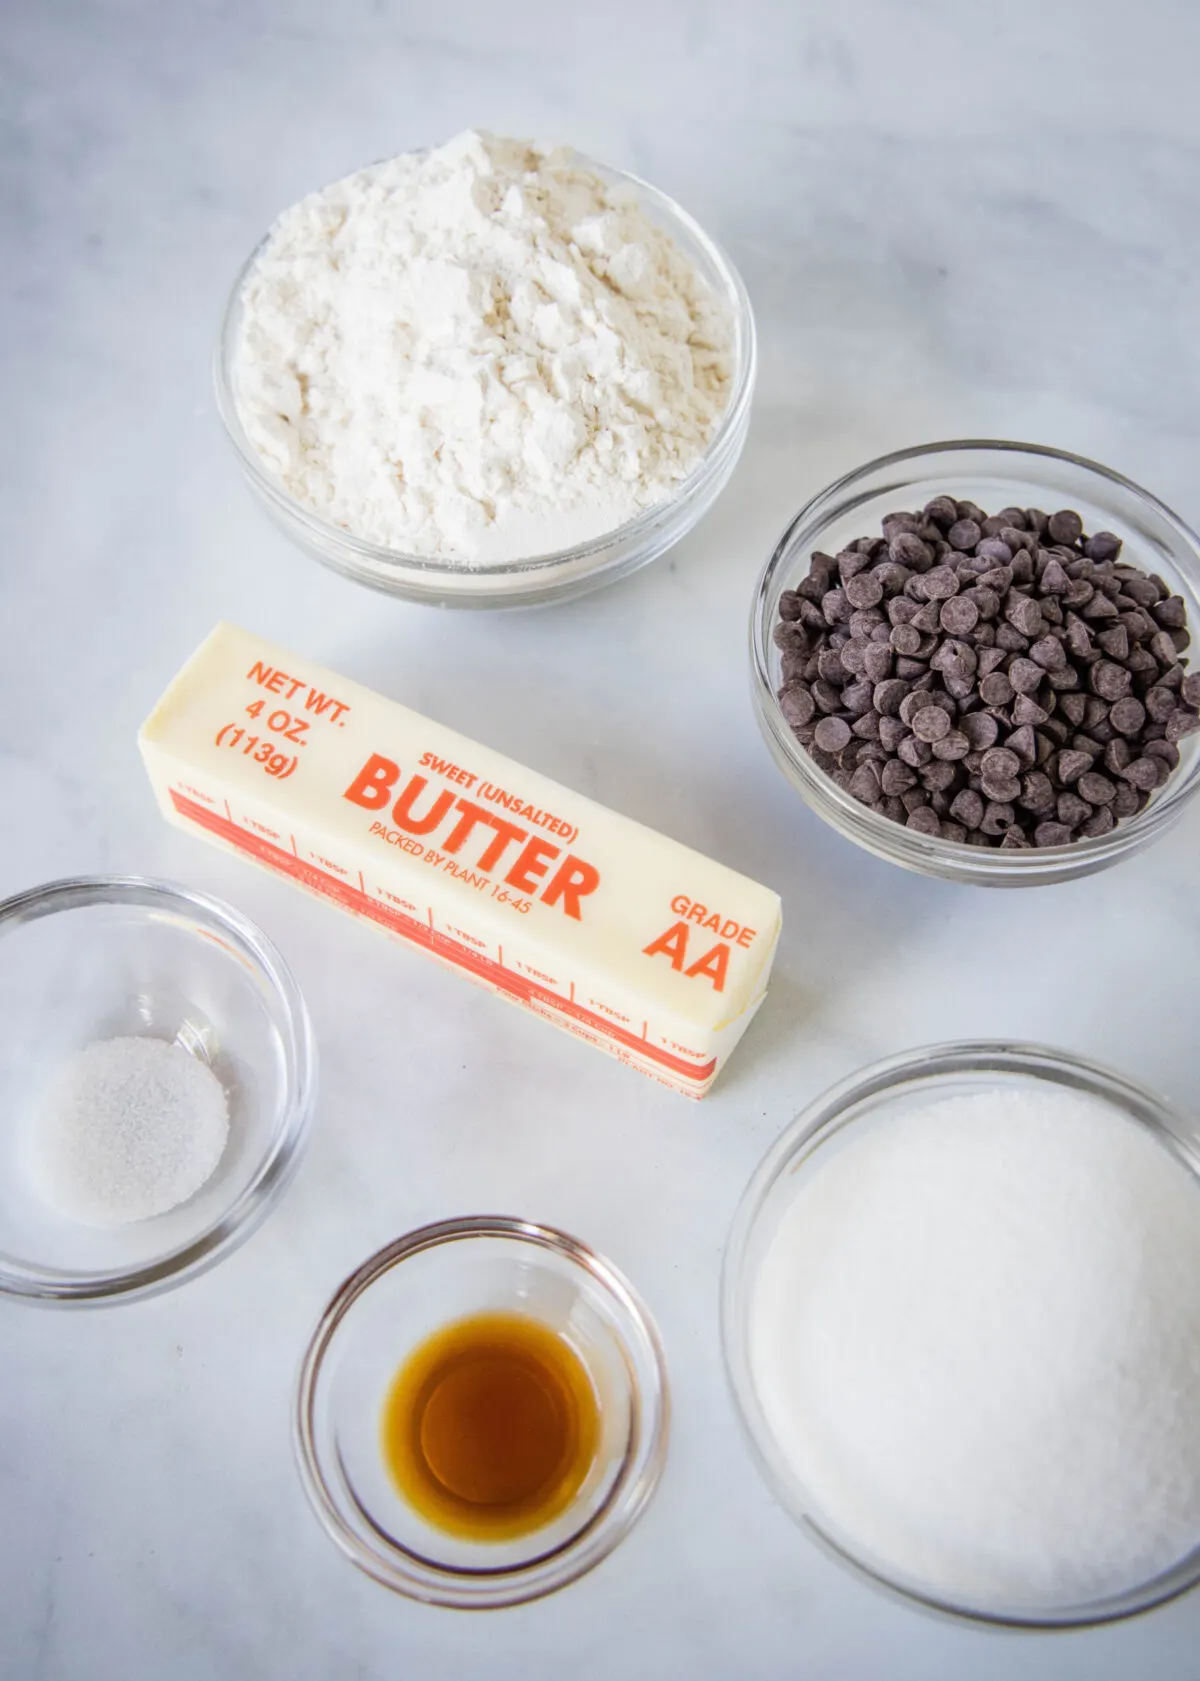 Overhead view of the ingredients needed for chocolate chip shortbread: a bowl of flour, a bowl of sugar, a bowl of chocolate chips, a bowl of salt, a bowl of vanilla, and a stick of butter.